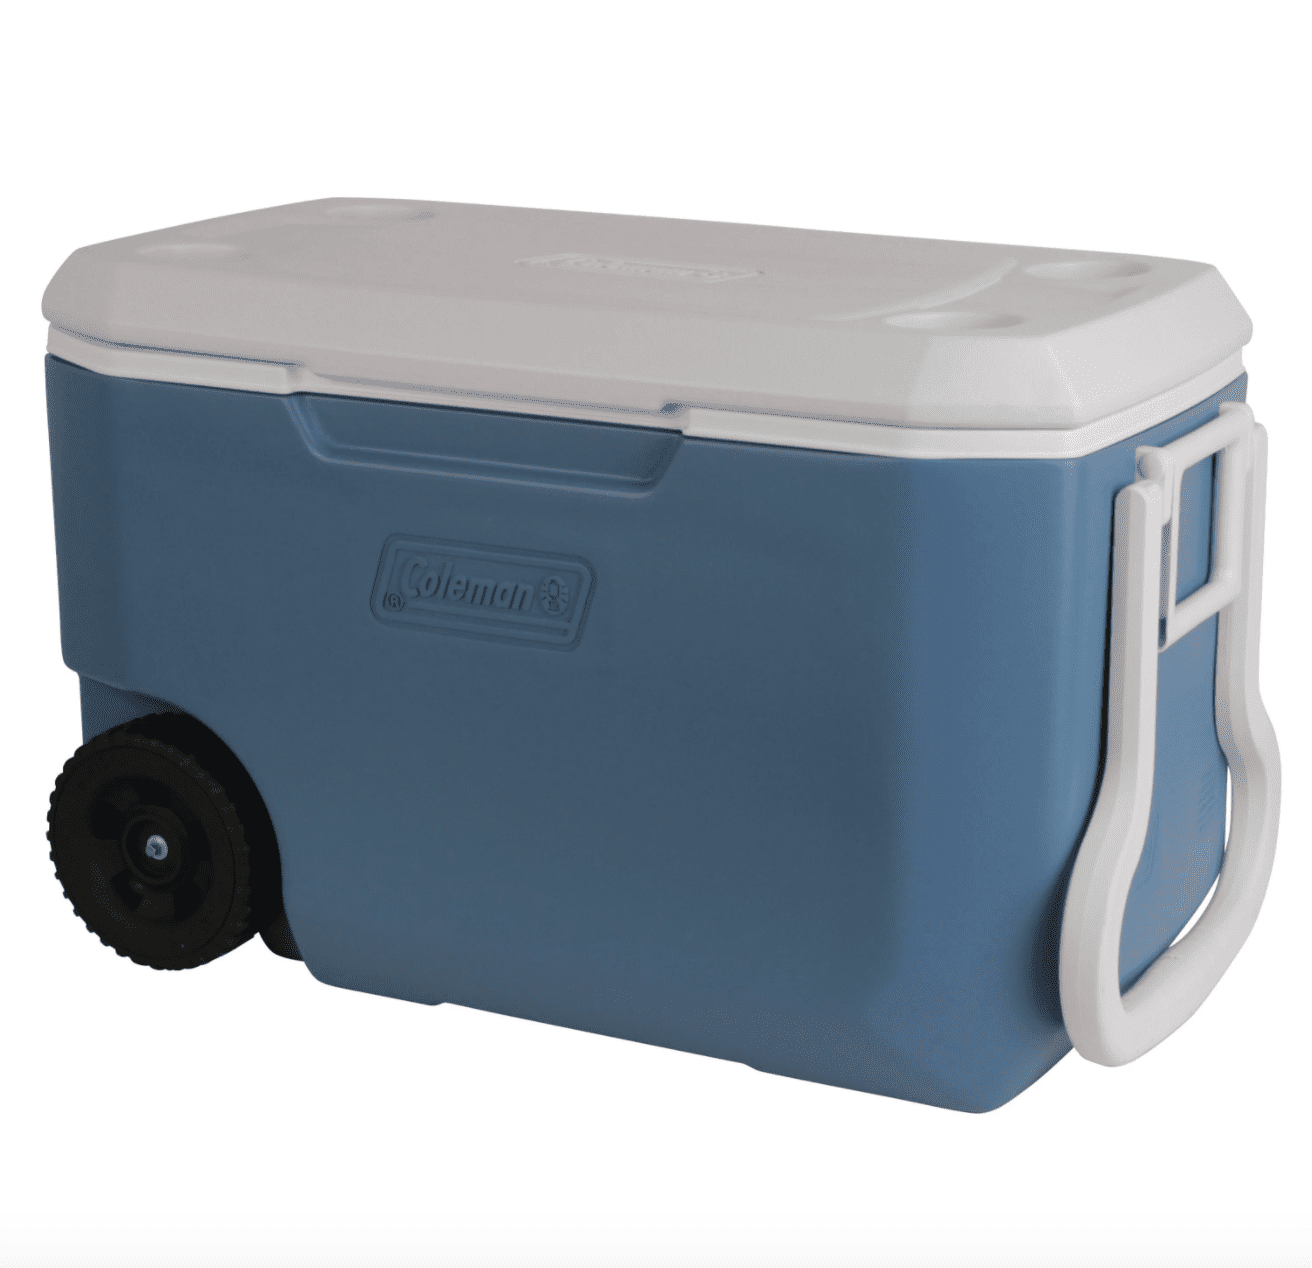 Coleman 62 Quart Xtreme 5 Day Heavy Duty Cooler with Wheels, Blue